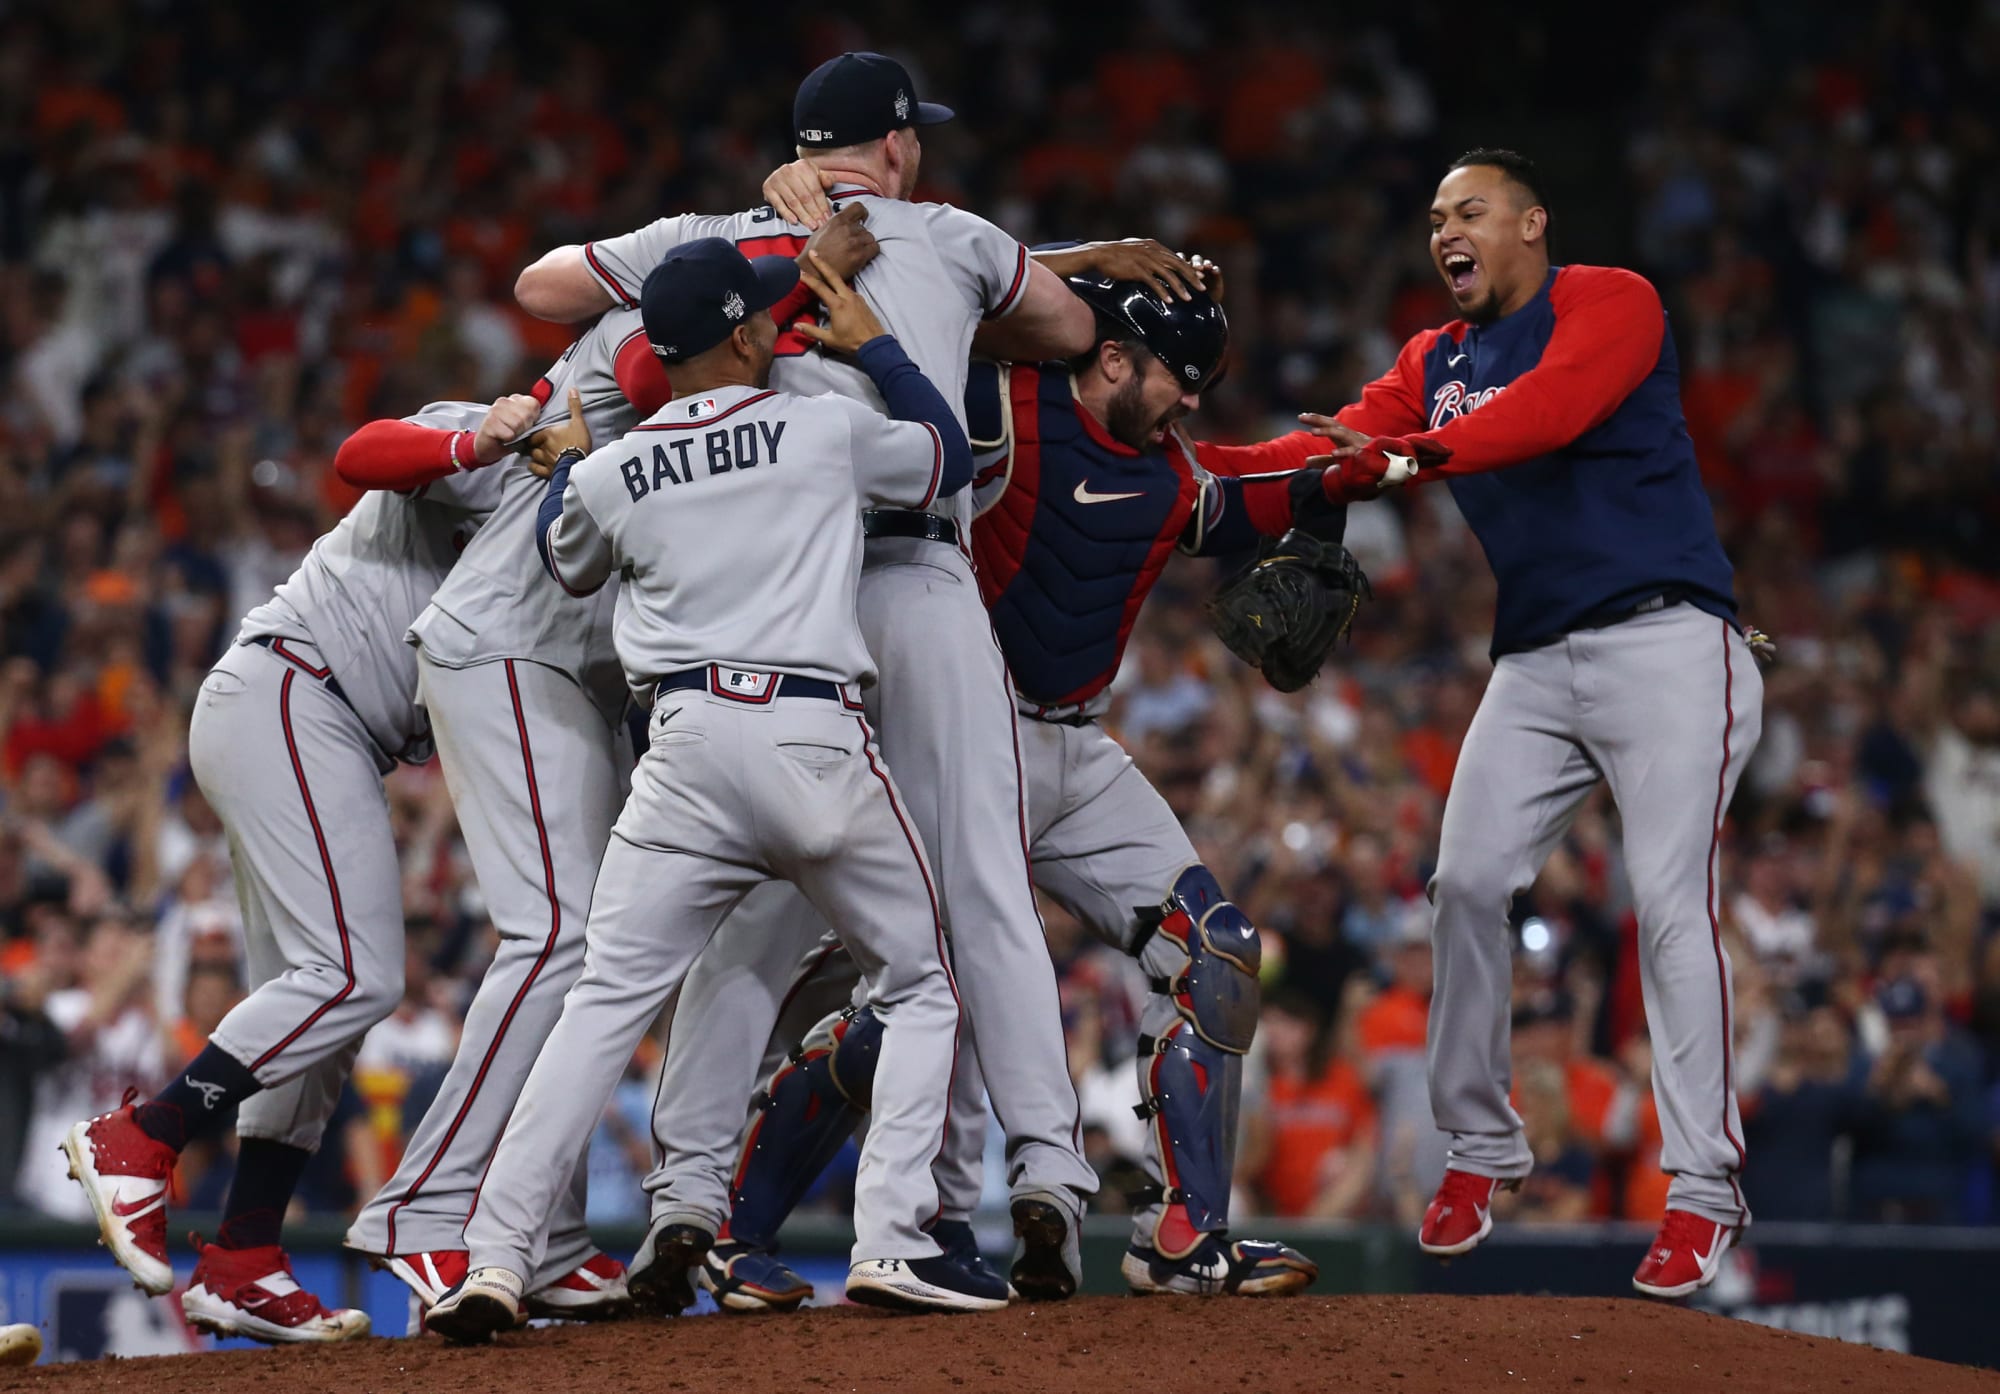 Joe Buck's call of final out in Braves World Series win will give all